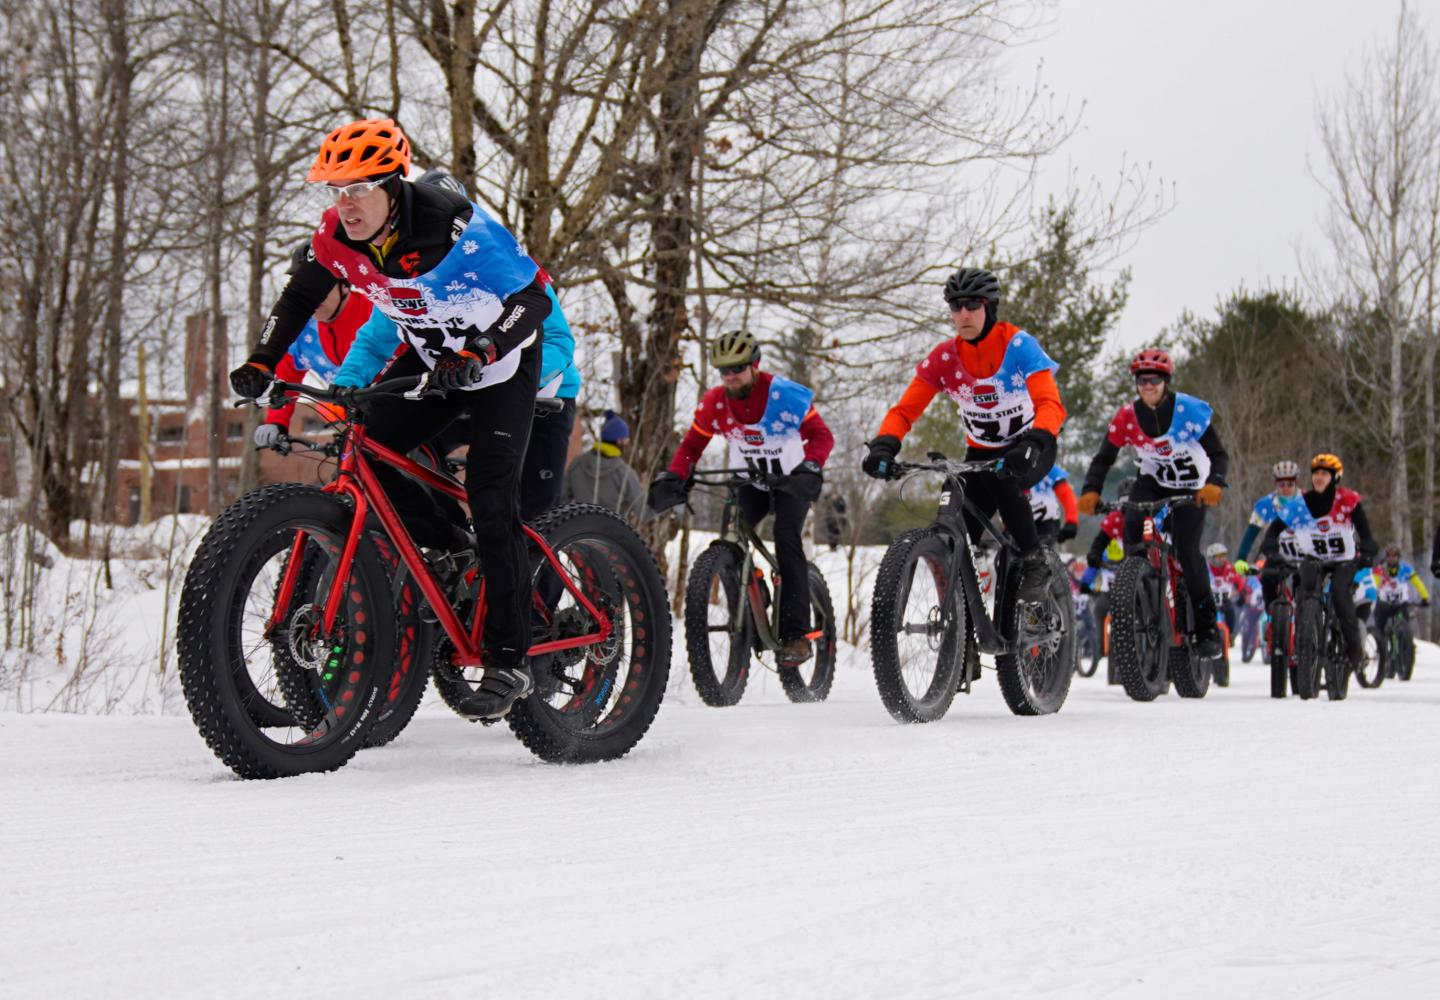 A group of racers leaves the starting line during the 2023 Empire State Winter Games Winter Bike races held at Dewey Mountain Recreation Center in Saranac Lake.